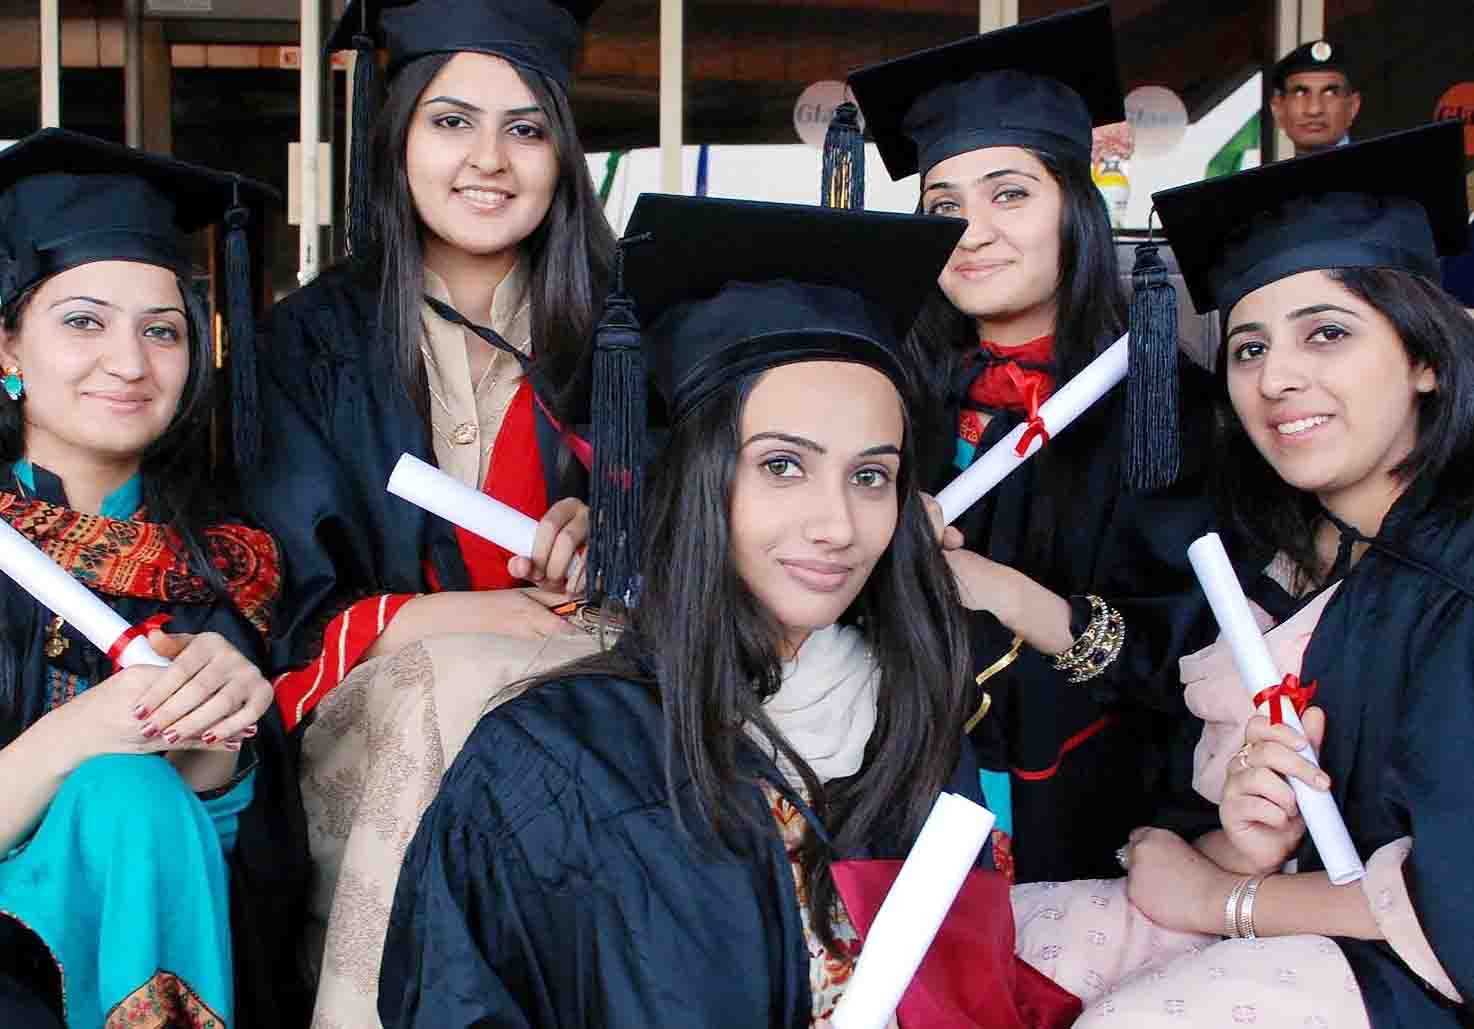 Engineering Degrees of 21 Universities and Colleges Declared Fake